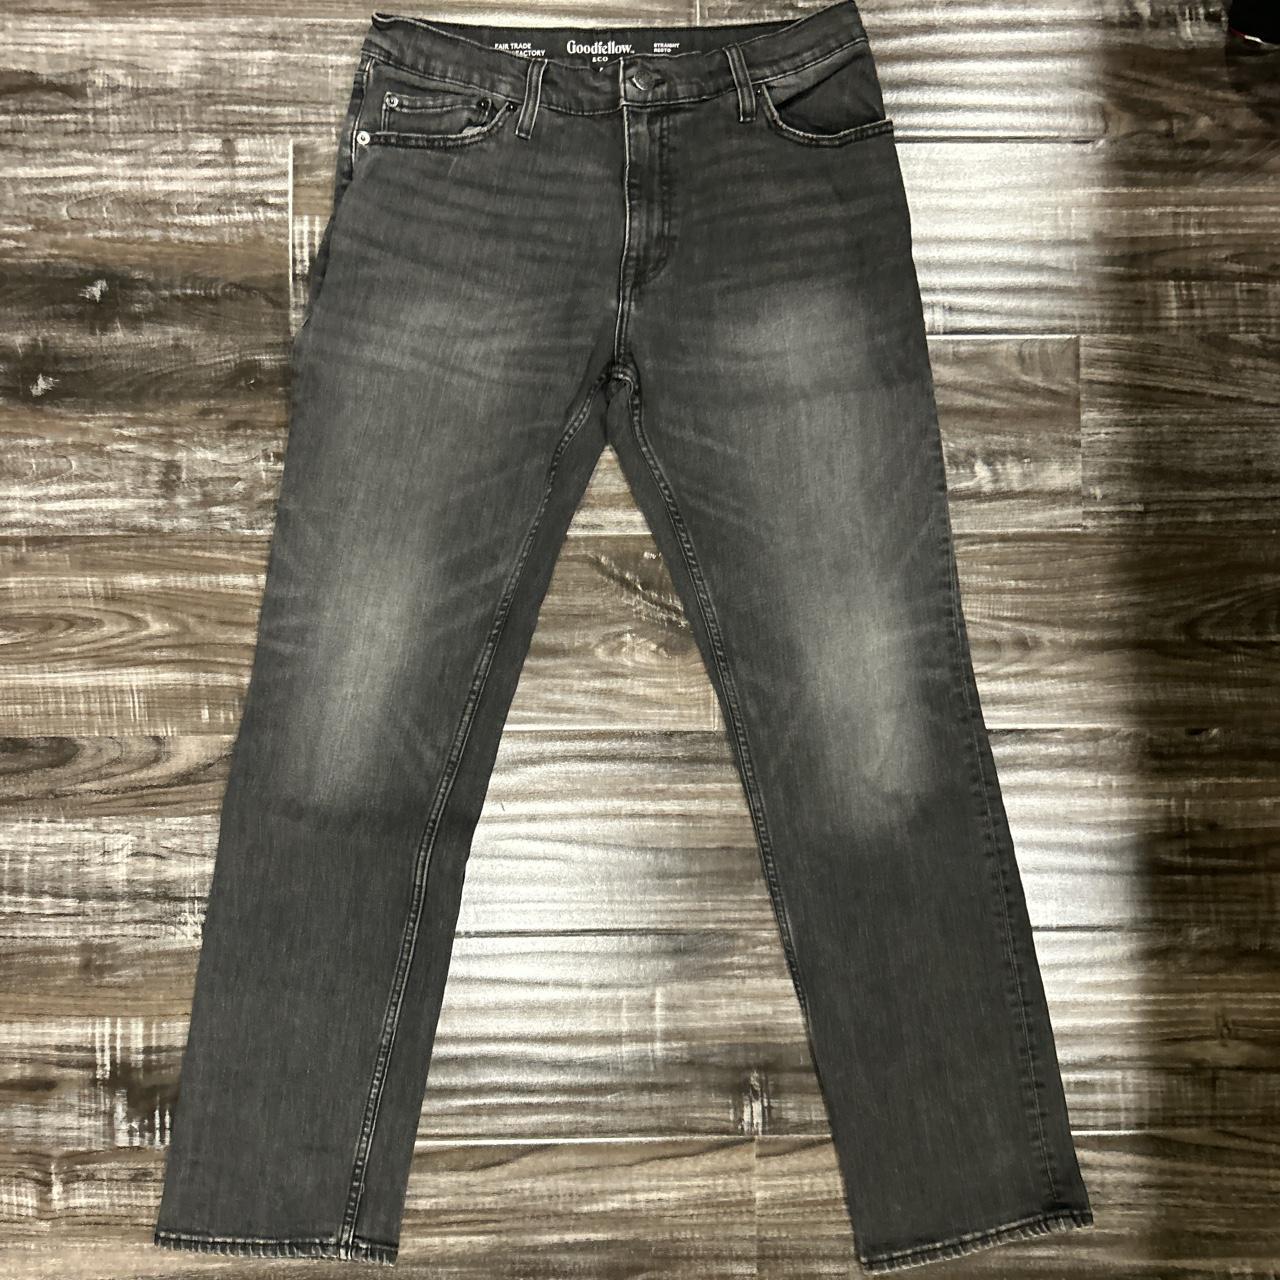 Goodfellow & Co, Jeans, Mens Jeans 34x32